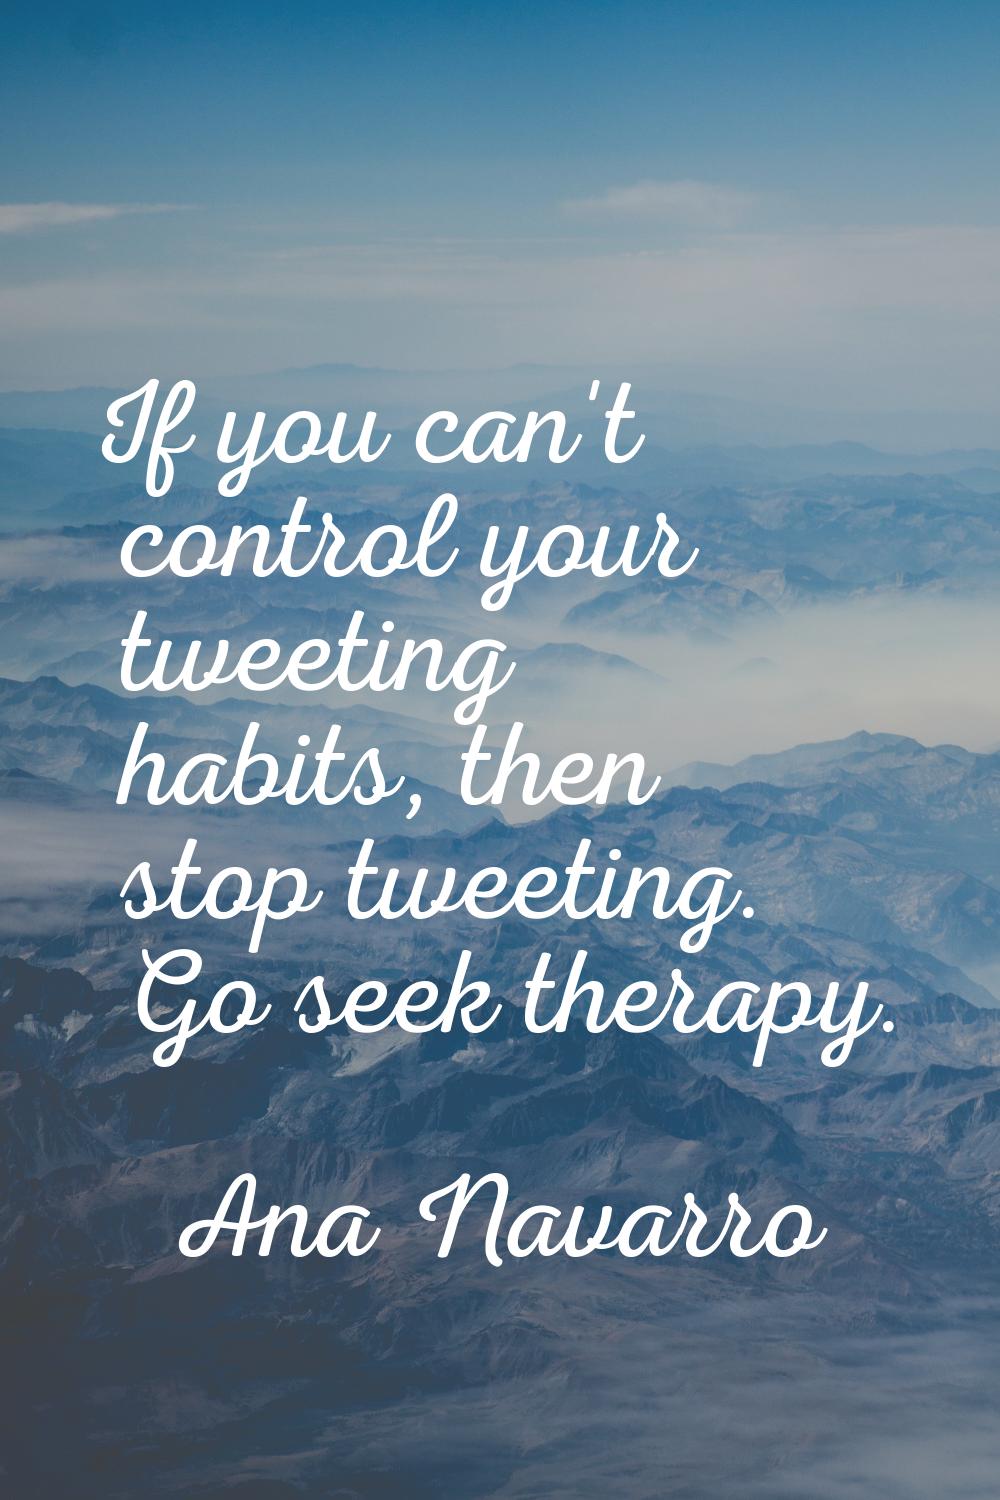 If you can't control your tweeting habits, then stop tweeting. Go seek therapy.